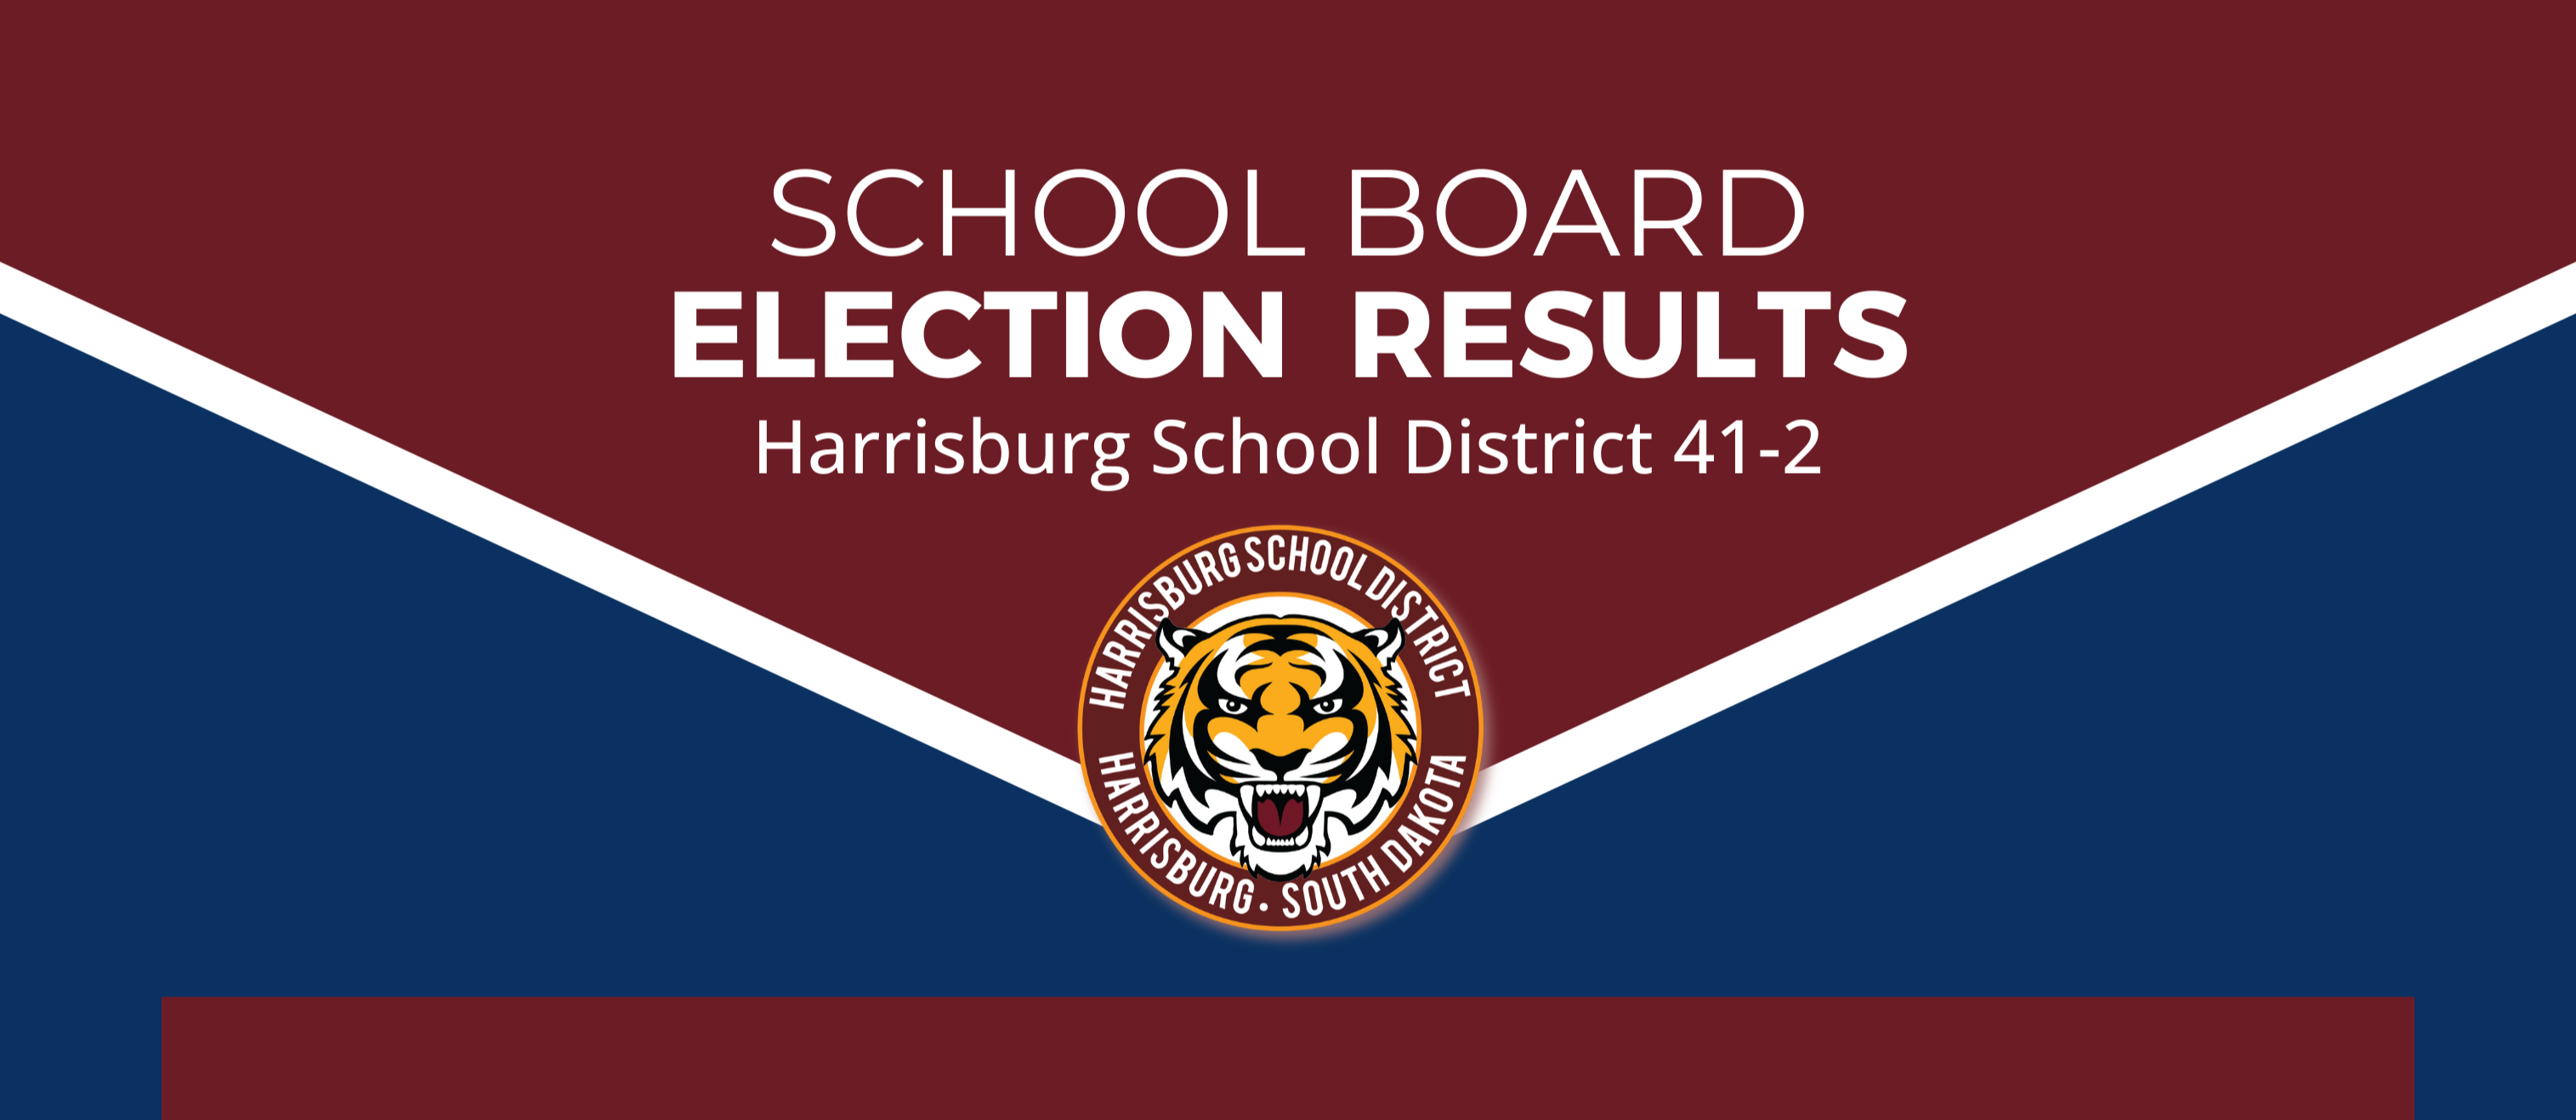 Election Information results